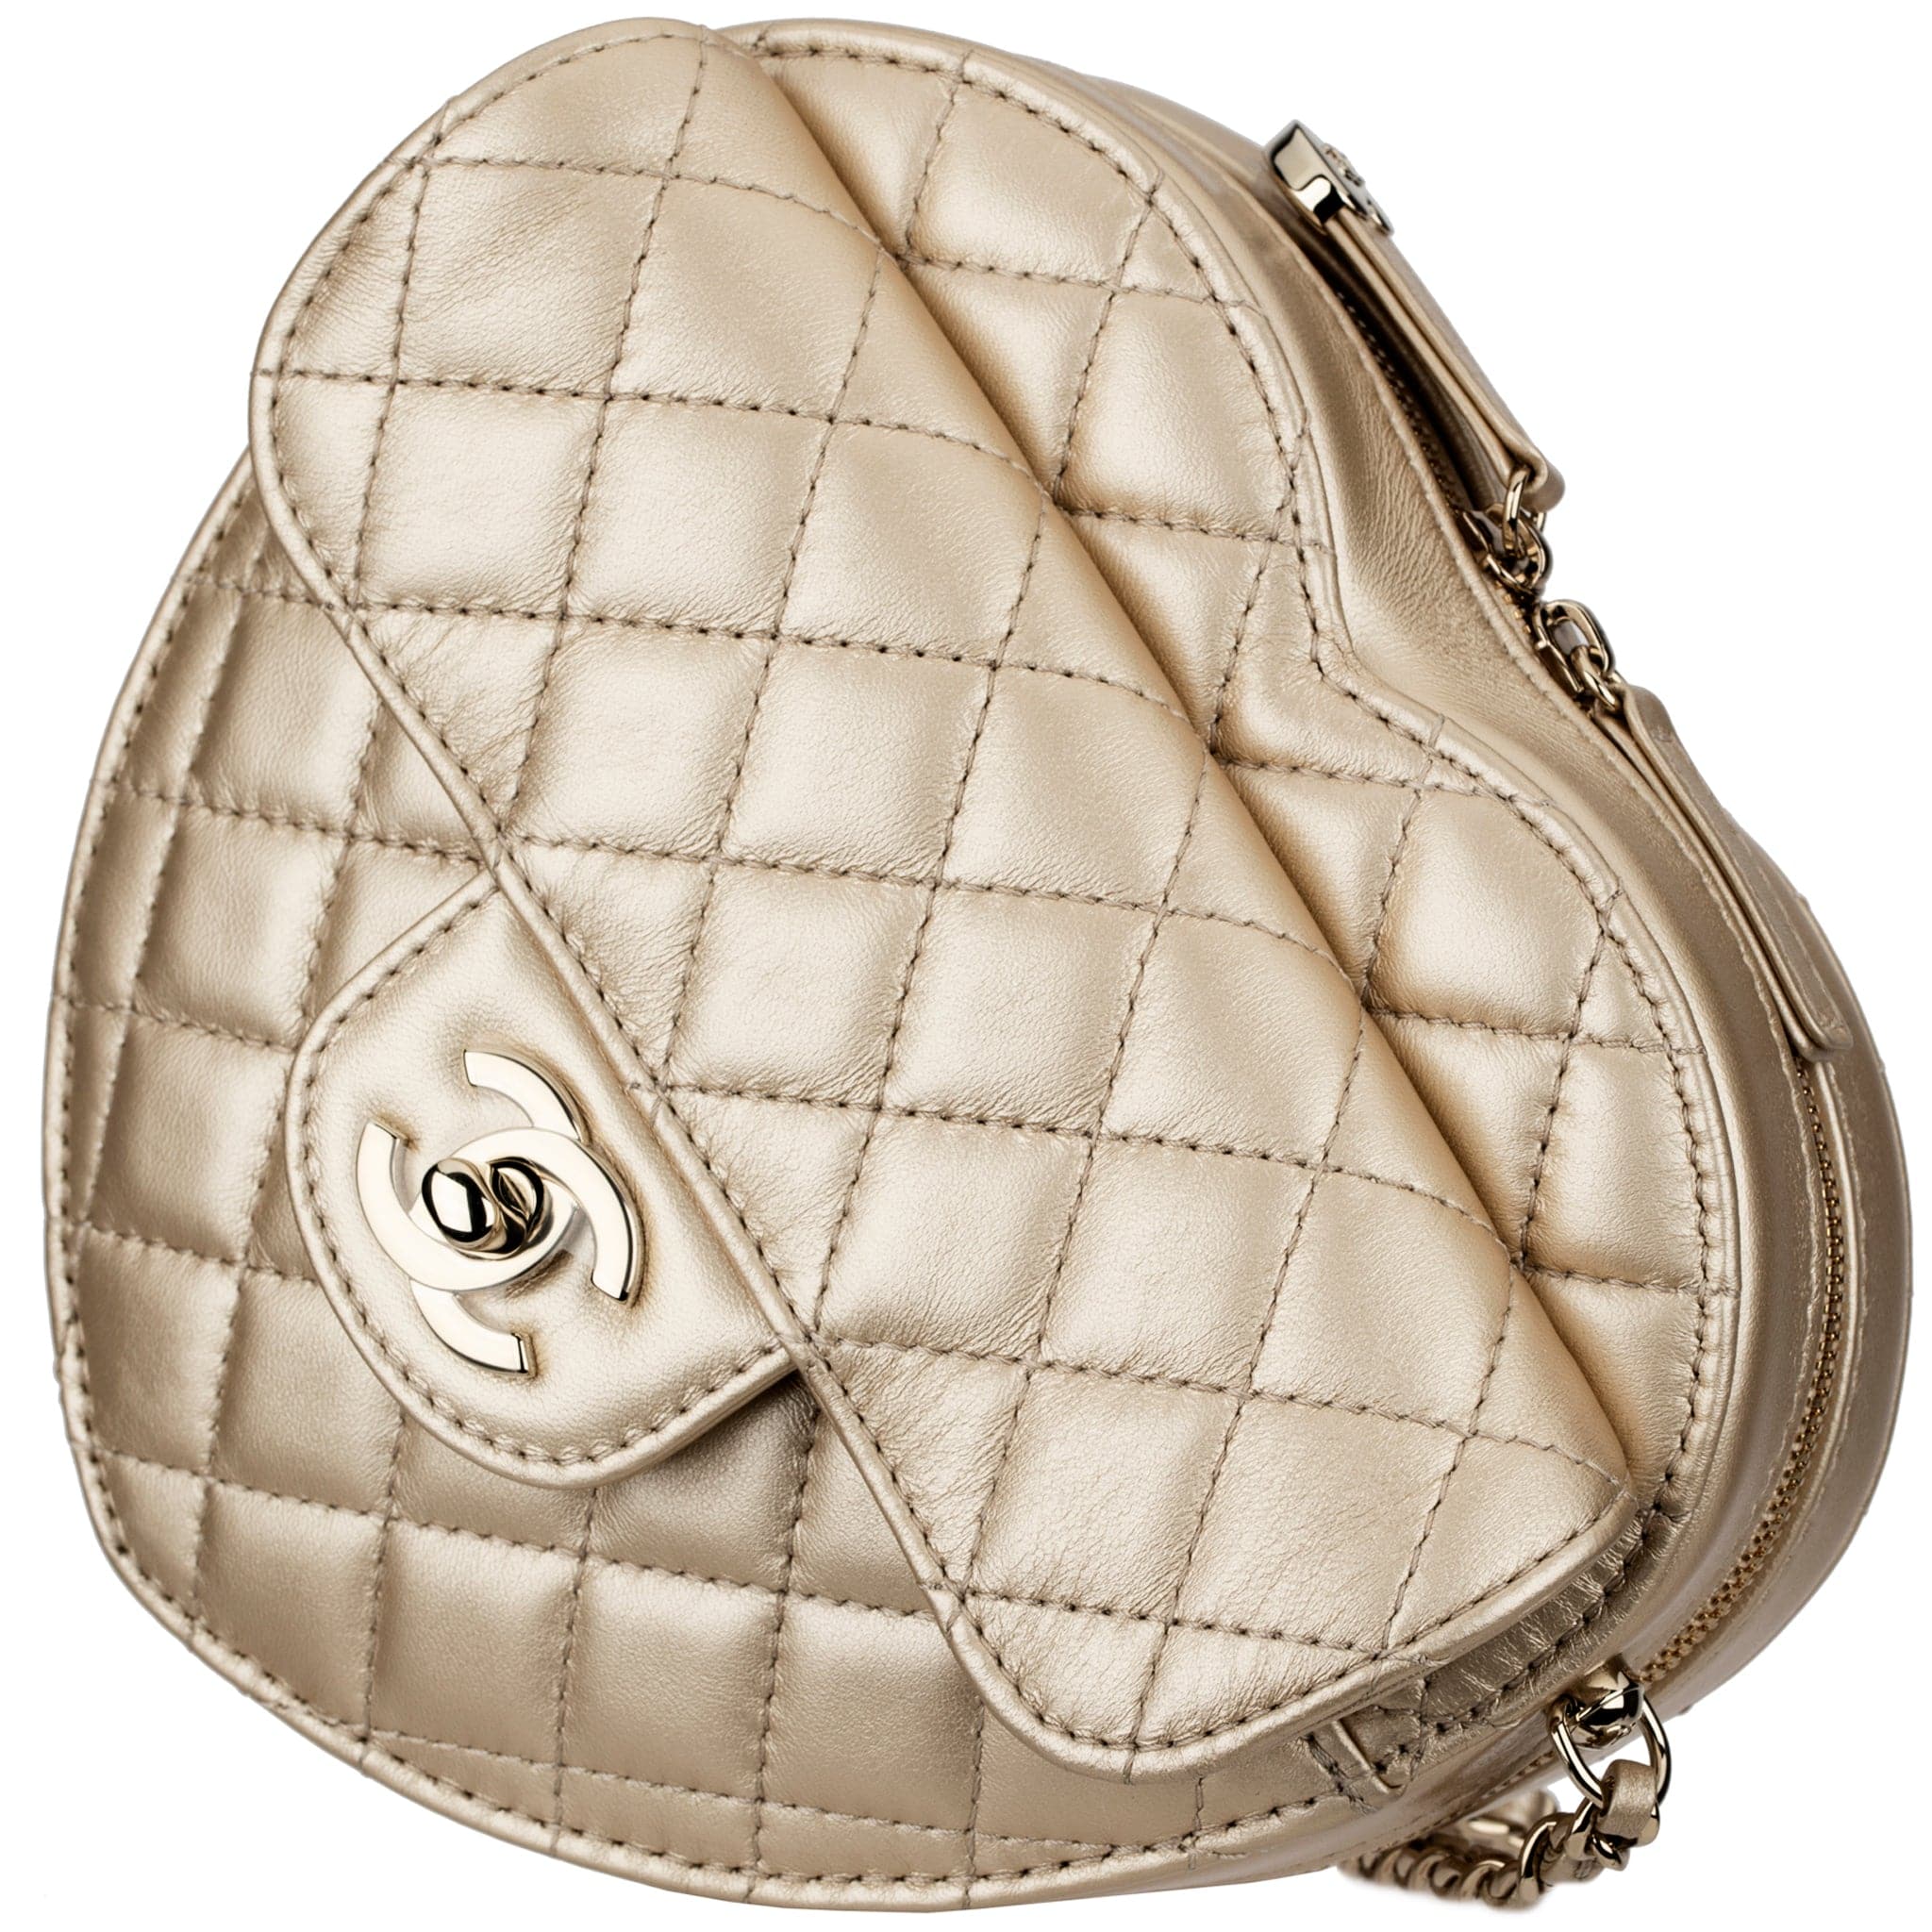 CHANEL METALLIC GOLD LOVE HEART BAG LAMBSKIN LEATHER CHAMPAGNE GOLD HARDWARE - On Repeat